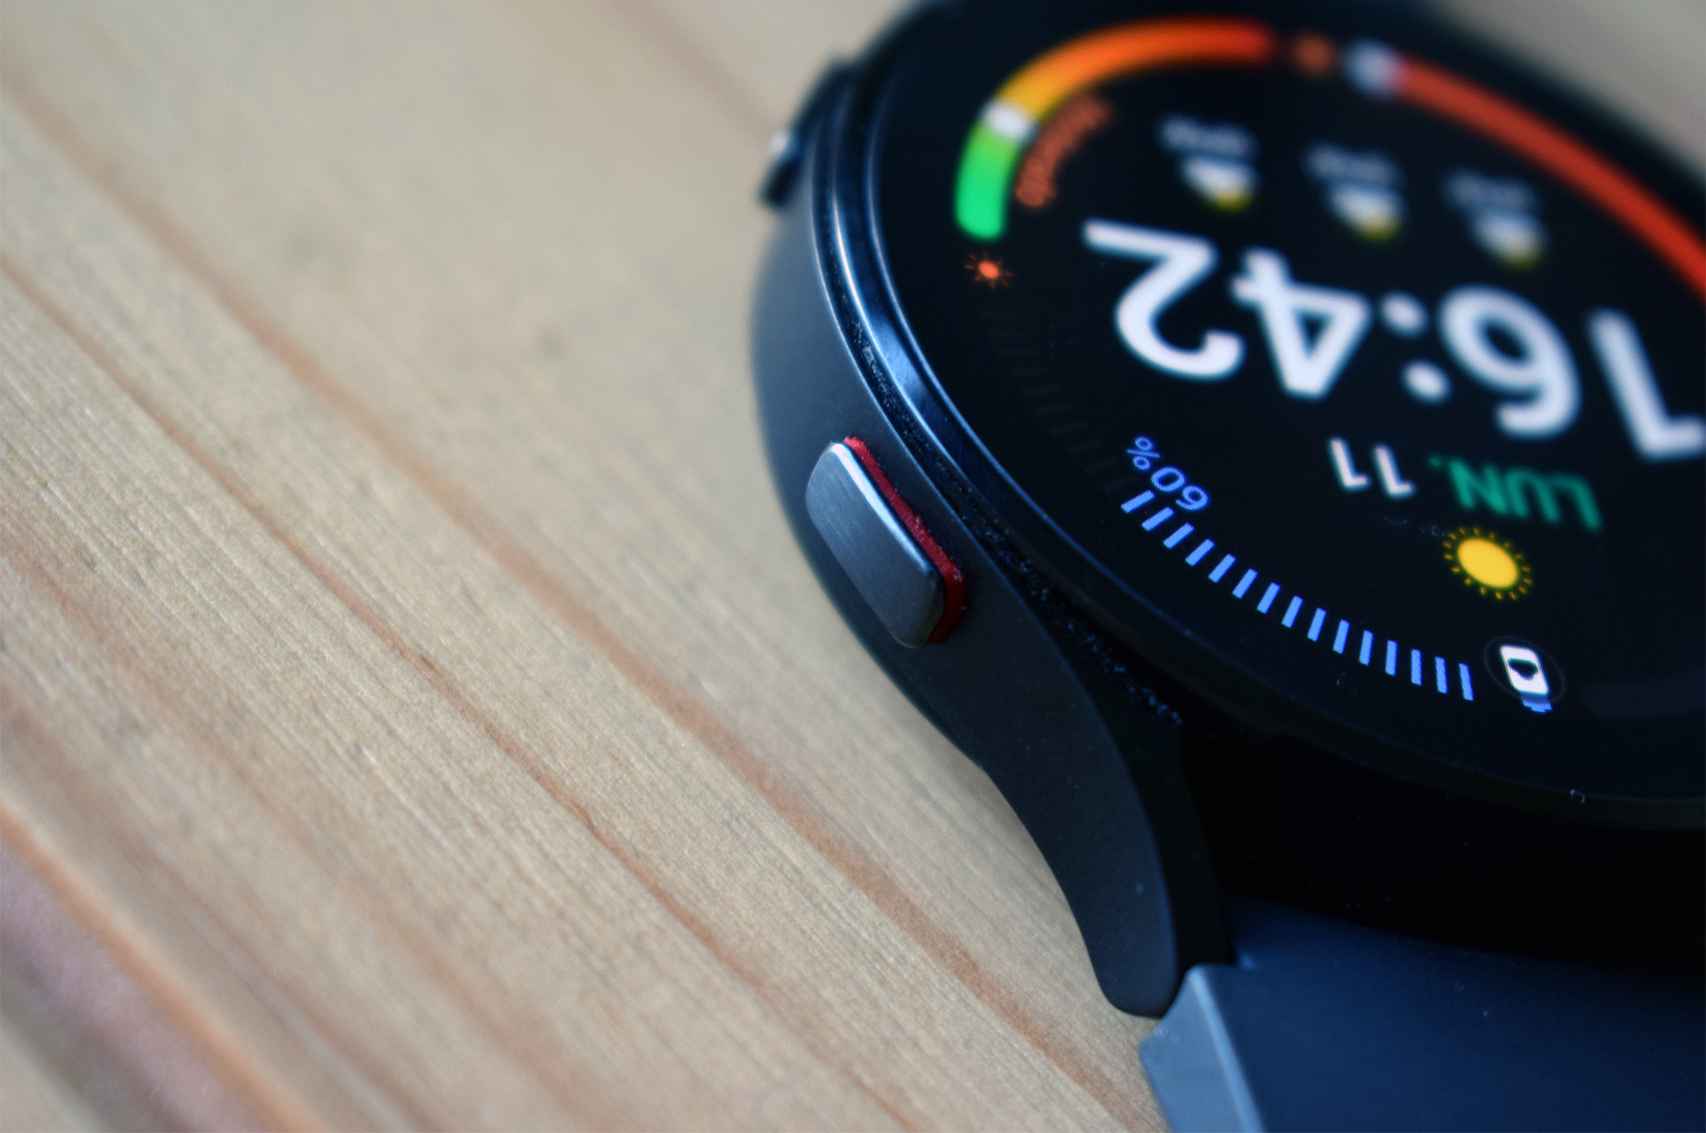 The side showing the design of the Samsung Galaxy Watch 4